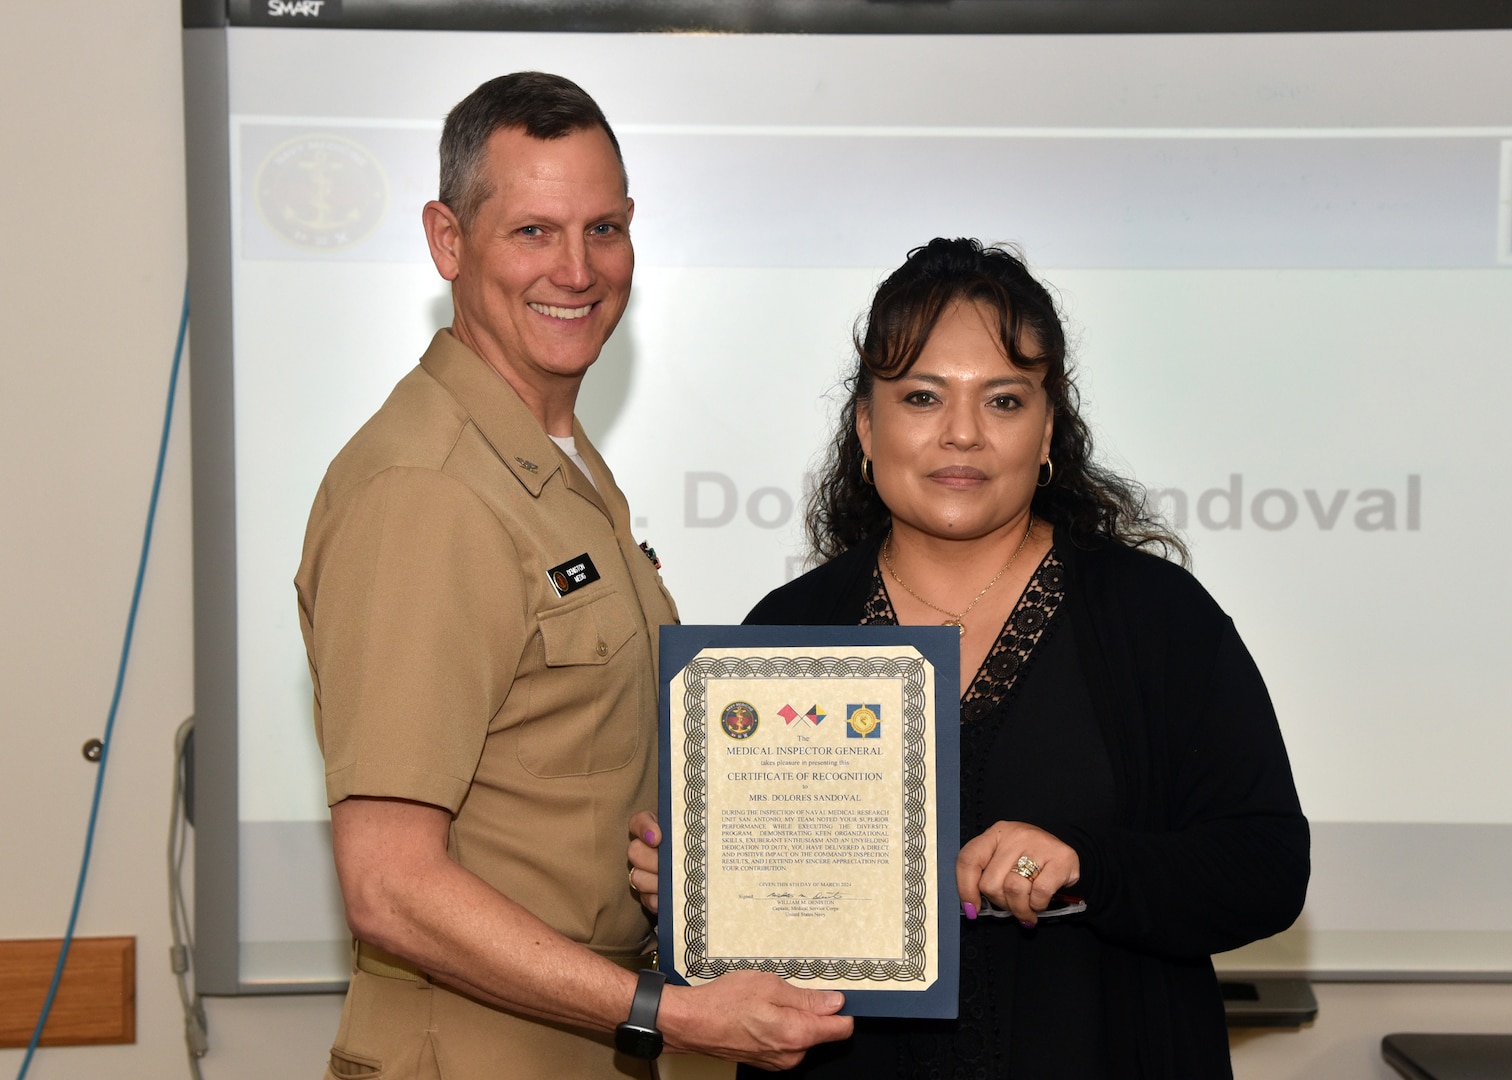 JOINT BASE SAN ANTONIO-FORT SAM HOUSTON – (March 6, 2024) – Dolores Quinones-Sandoval, executive assistant to the commanding officer, Naval Medical Research Unit (NAMRU) San Antonio, was recognized by Capt. William Deniston, medical inspector general (MEDIG), U.S. Navy’s Bureau of Medicine and Surgery (BUMED), for her exceptional professionalism and expertise for serving as the program manager for Diversity during the MEDIG outbrief held at the Battlefield Health and Trauma Research Institute. Approximately 12 inspectors conducted evaluations of 40 programs and collateral duties over three days at Naval Medical Research Unit (NAMRU) San Antonio to improve command performance and processes. NAMRU San Antonio’s mission is to conduct gap driven combat casualty care, craniofacial, and directed energy research to improve survival, operational readiness, and safety of DoD personnel engaged in routine and expeditionary operations. It is one of the leading research and development laboratories for the U.S. Navy under the DoD and is one of eight subordinate research commands in the global network of laboratories operating under the Naval Medical Research Command in Silver Spring, Md. (U.S. Navy photo by Burrell Parmer, NAMRU San Antonio Public Affairs/Released)